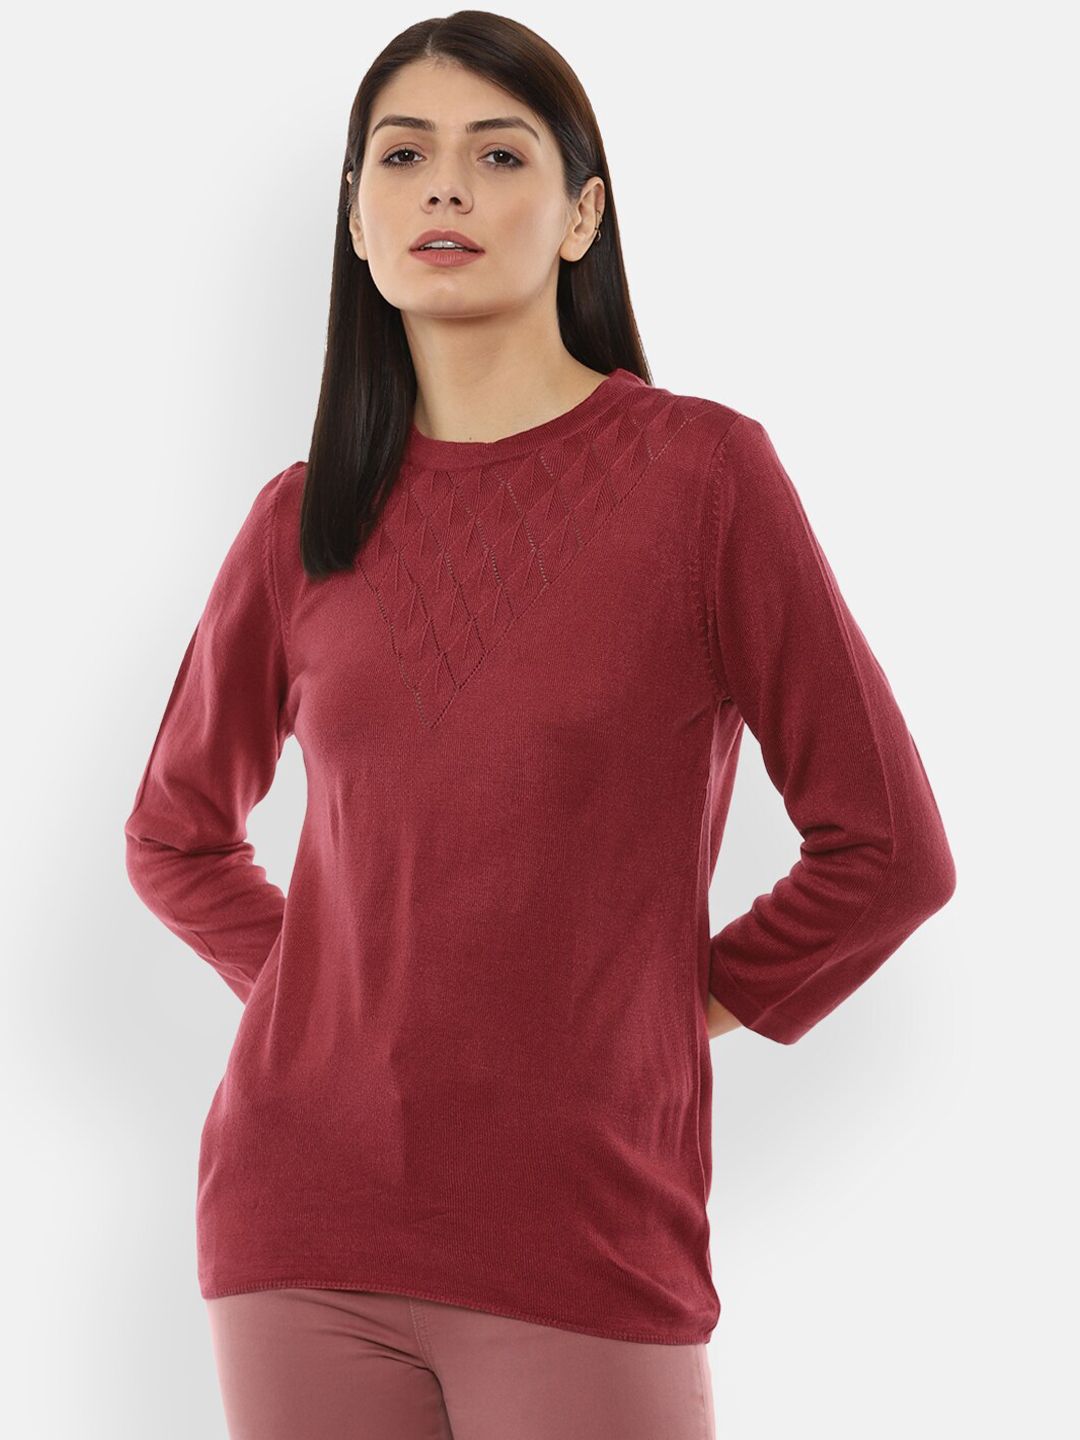 Van Heusen Woman Women Maroon Cable Knit Pullover Price in India